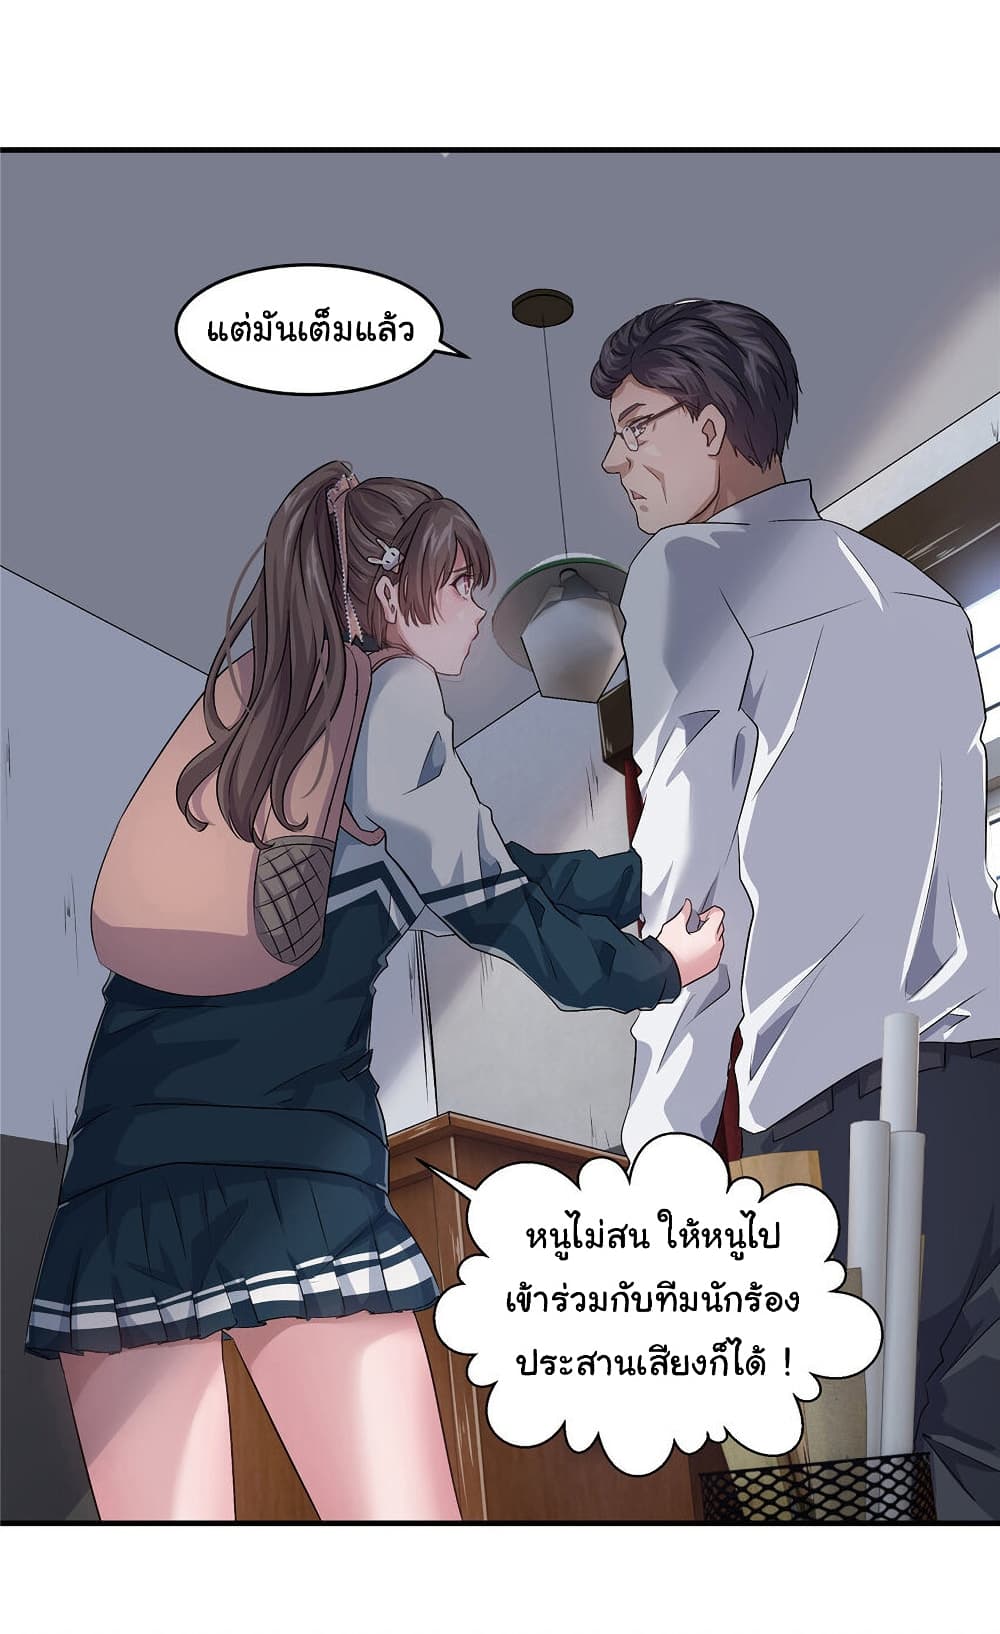 Live Steadily, Donโ€t Wave เธ•เธญเธเธ—เธตเน 5 (22)